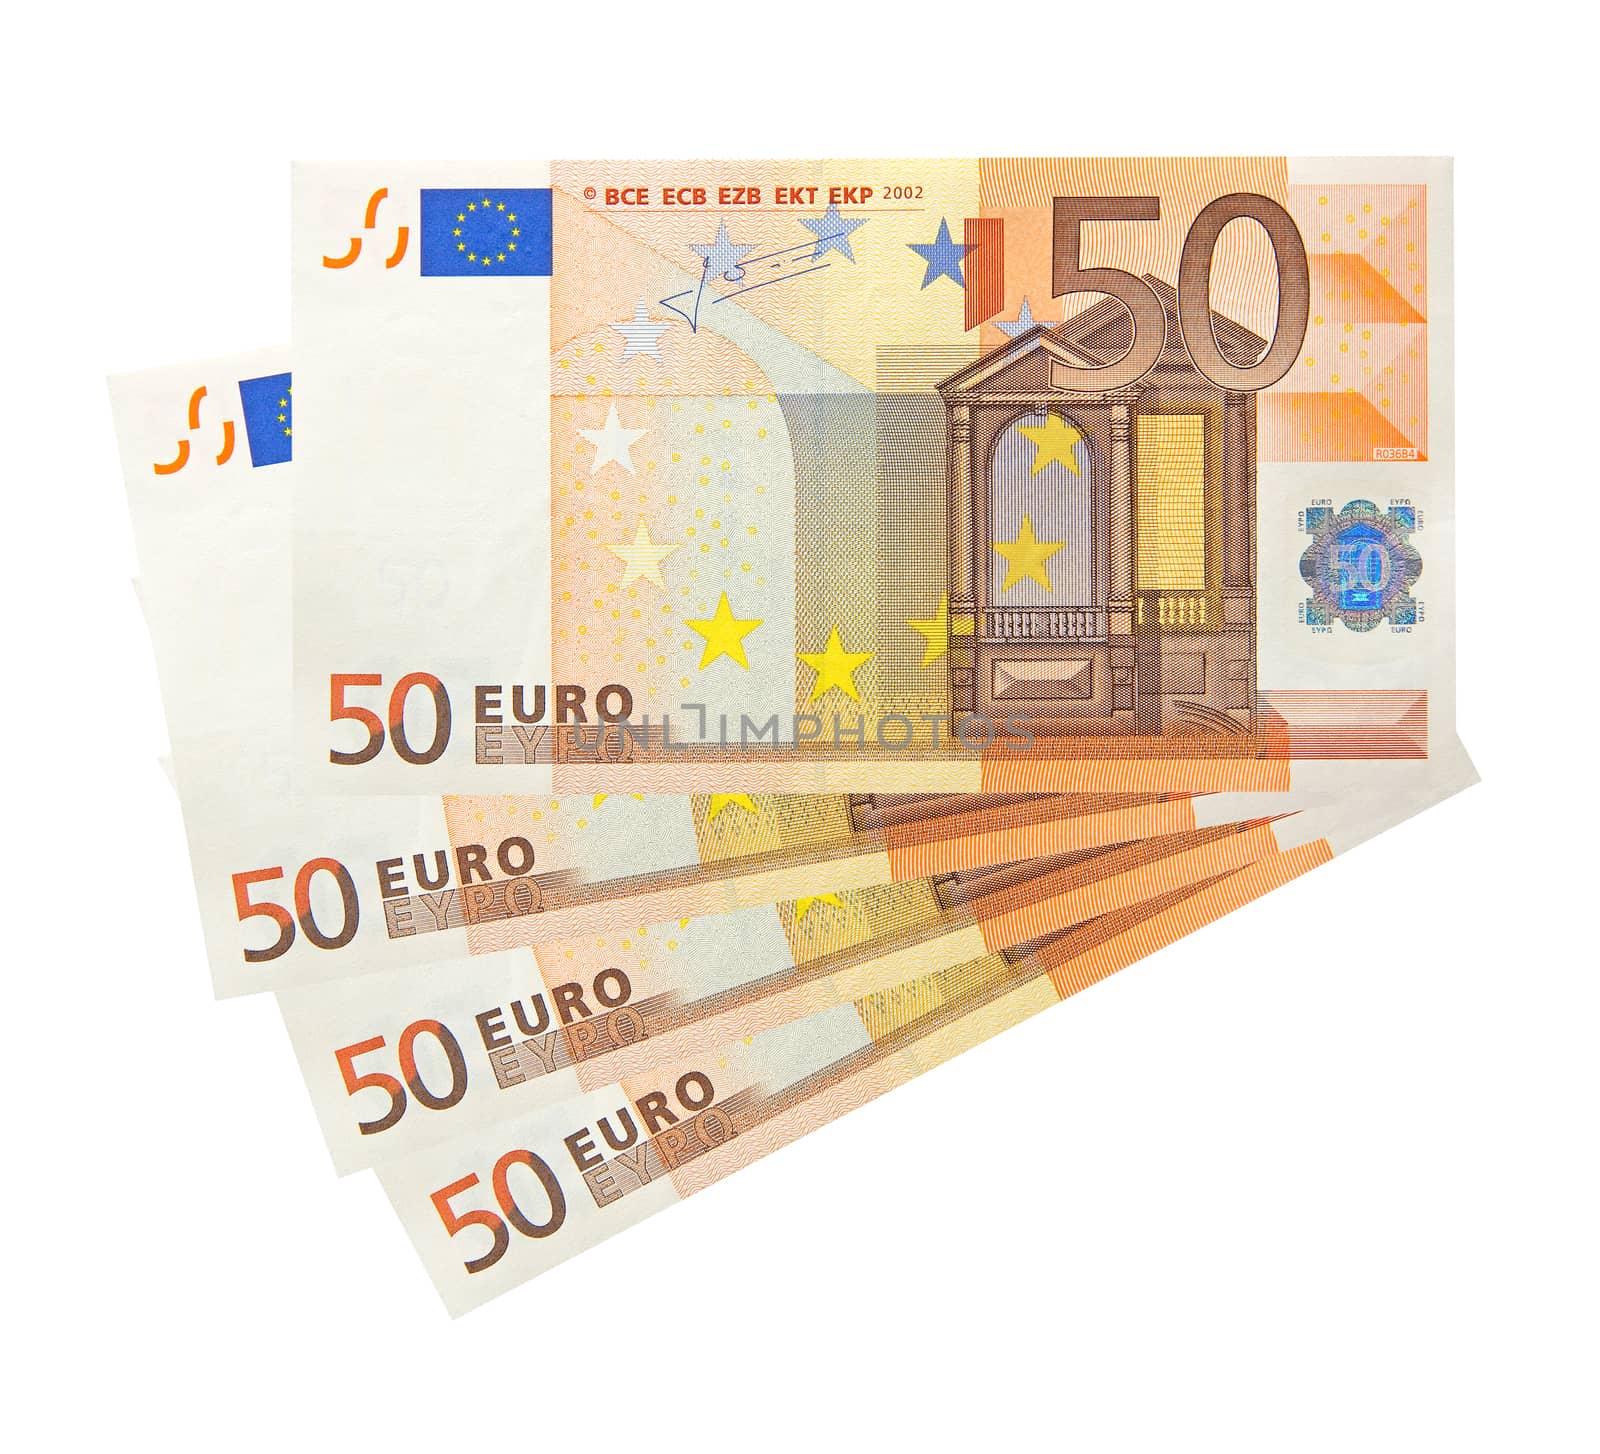 50 Euro banknote fanned out - isolated on white background